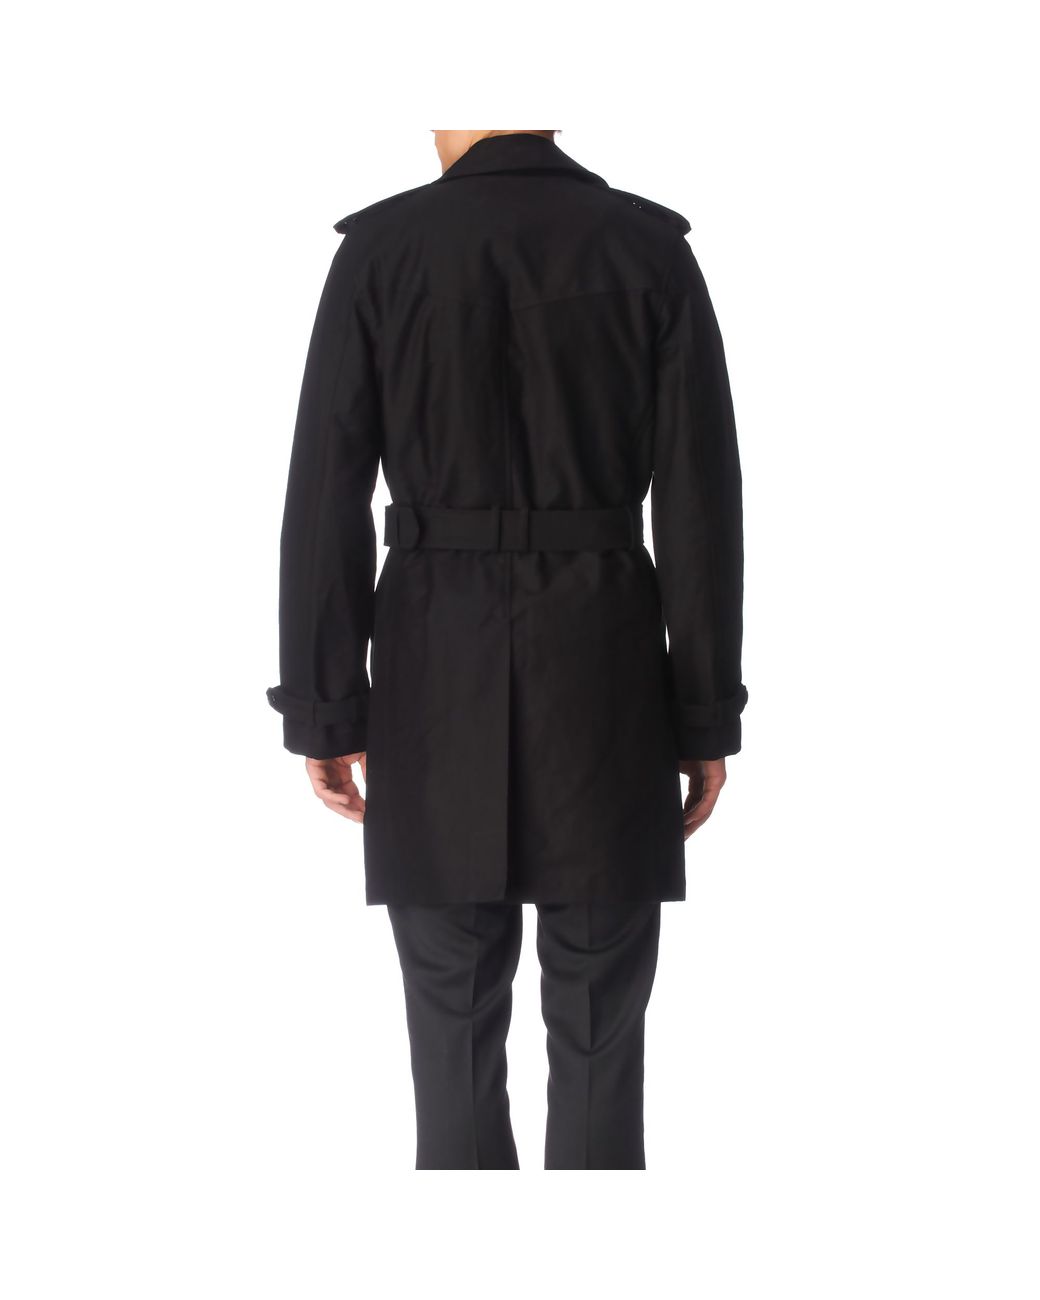 Paul Smith Men's Black Double–breasted Trench Coat